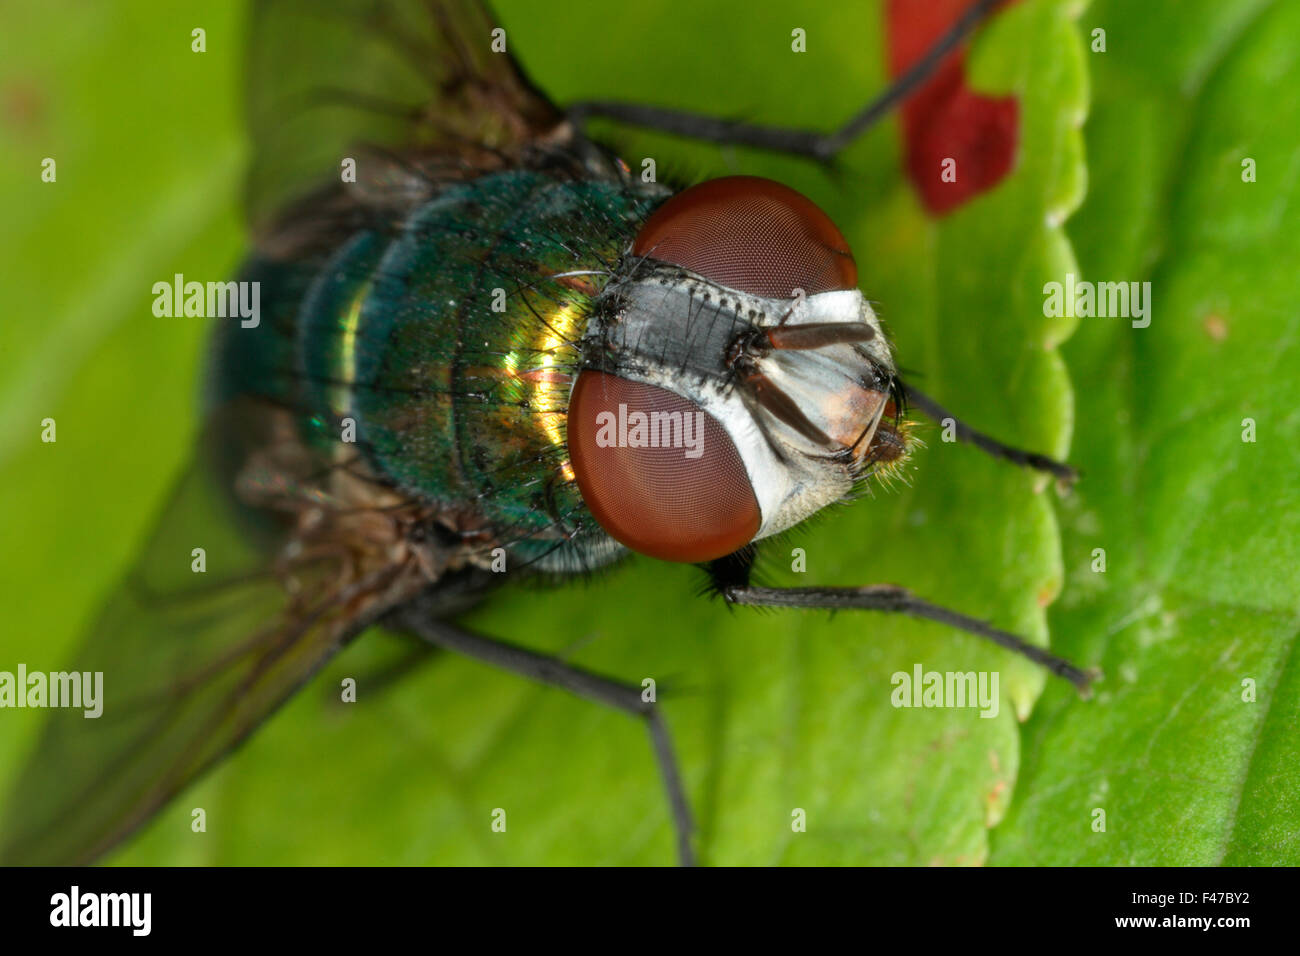 Green bottle fly, close-up, Sweden. Stock Photo